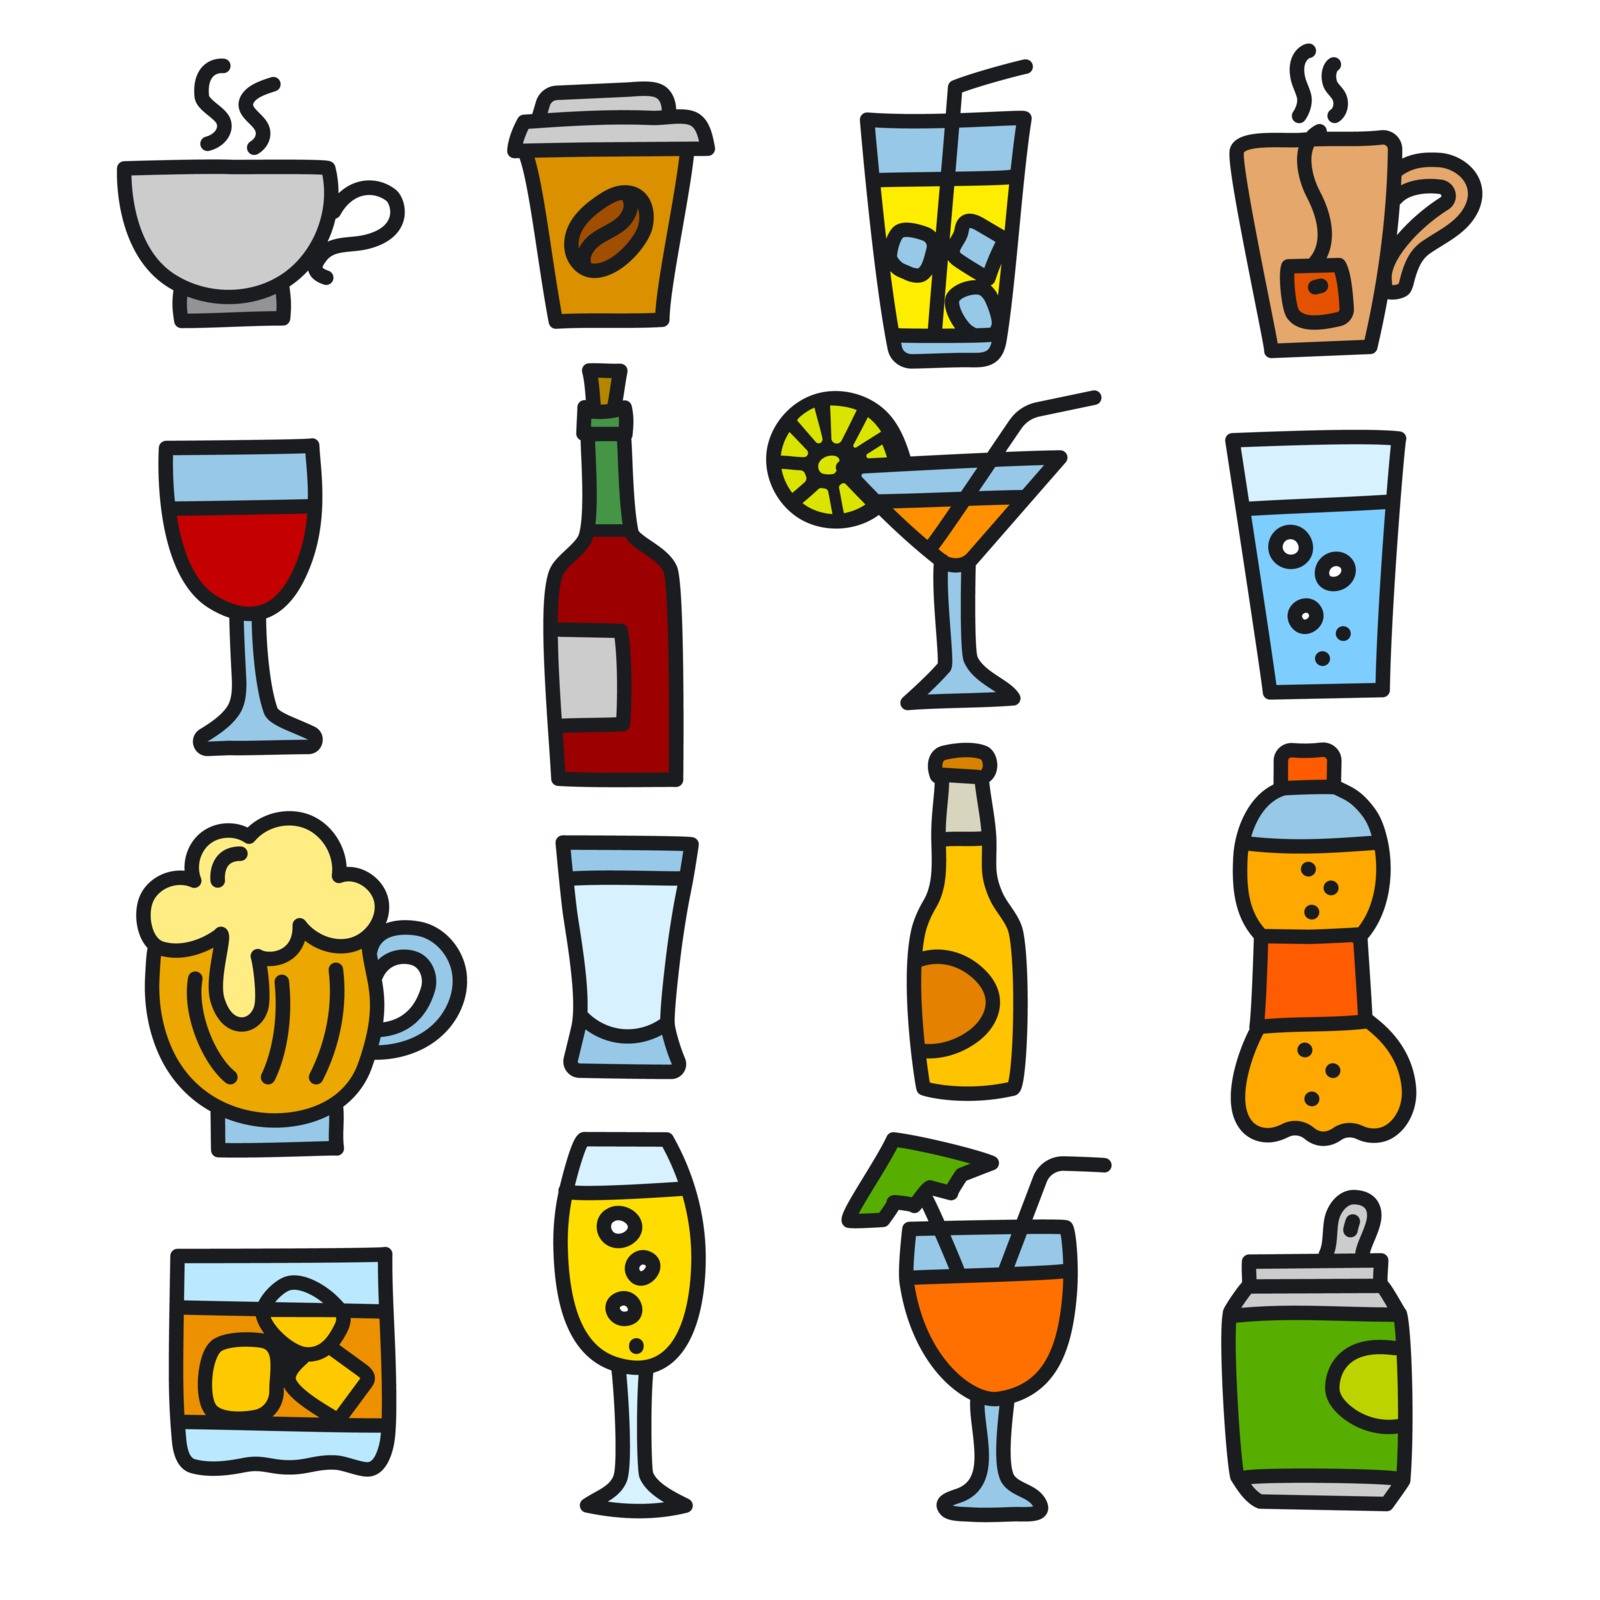 illustration of the alcohol drinks and beverages icons set